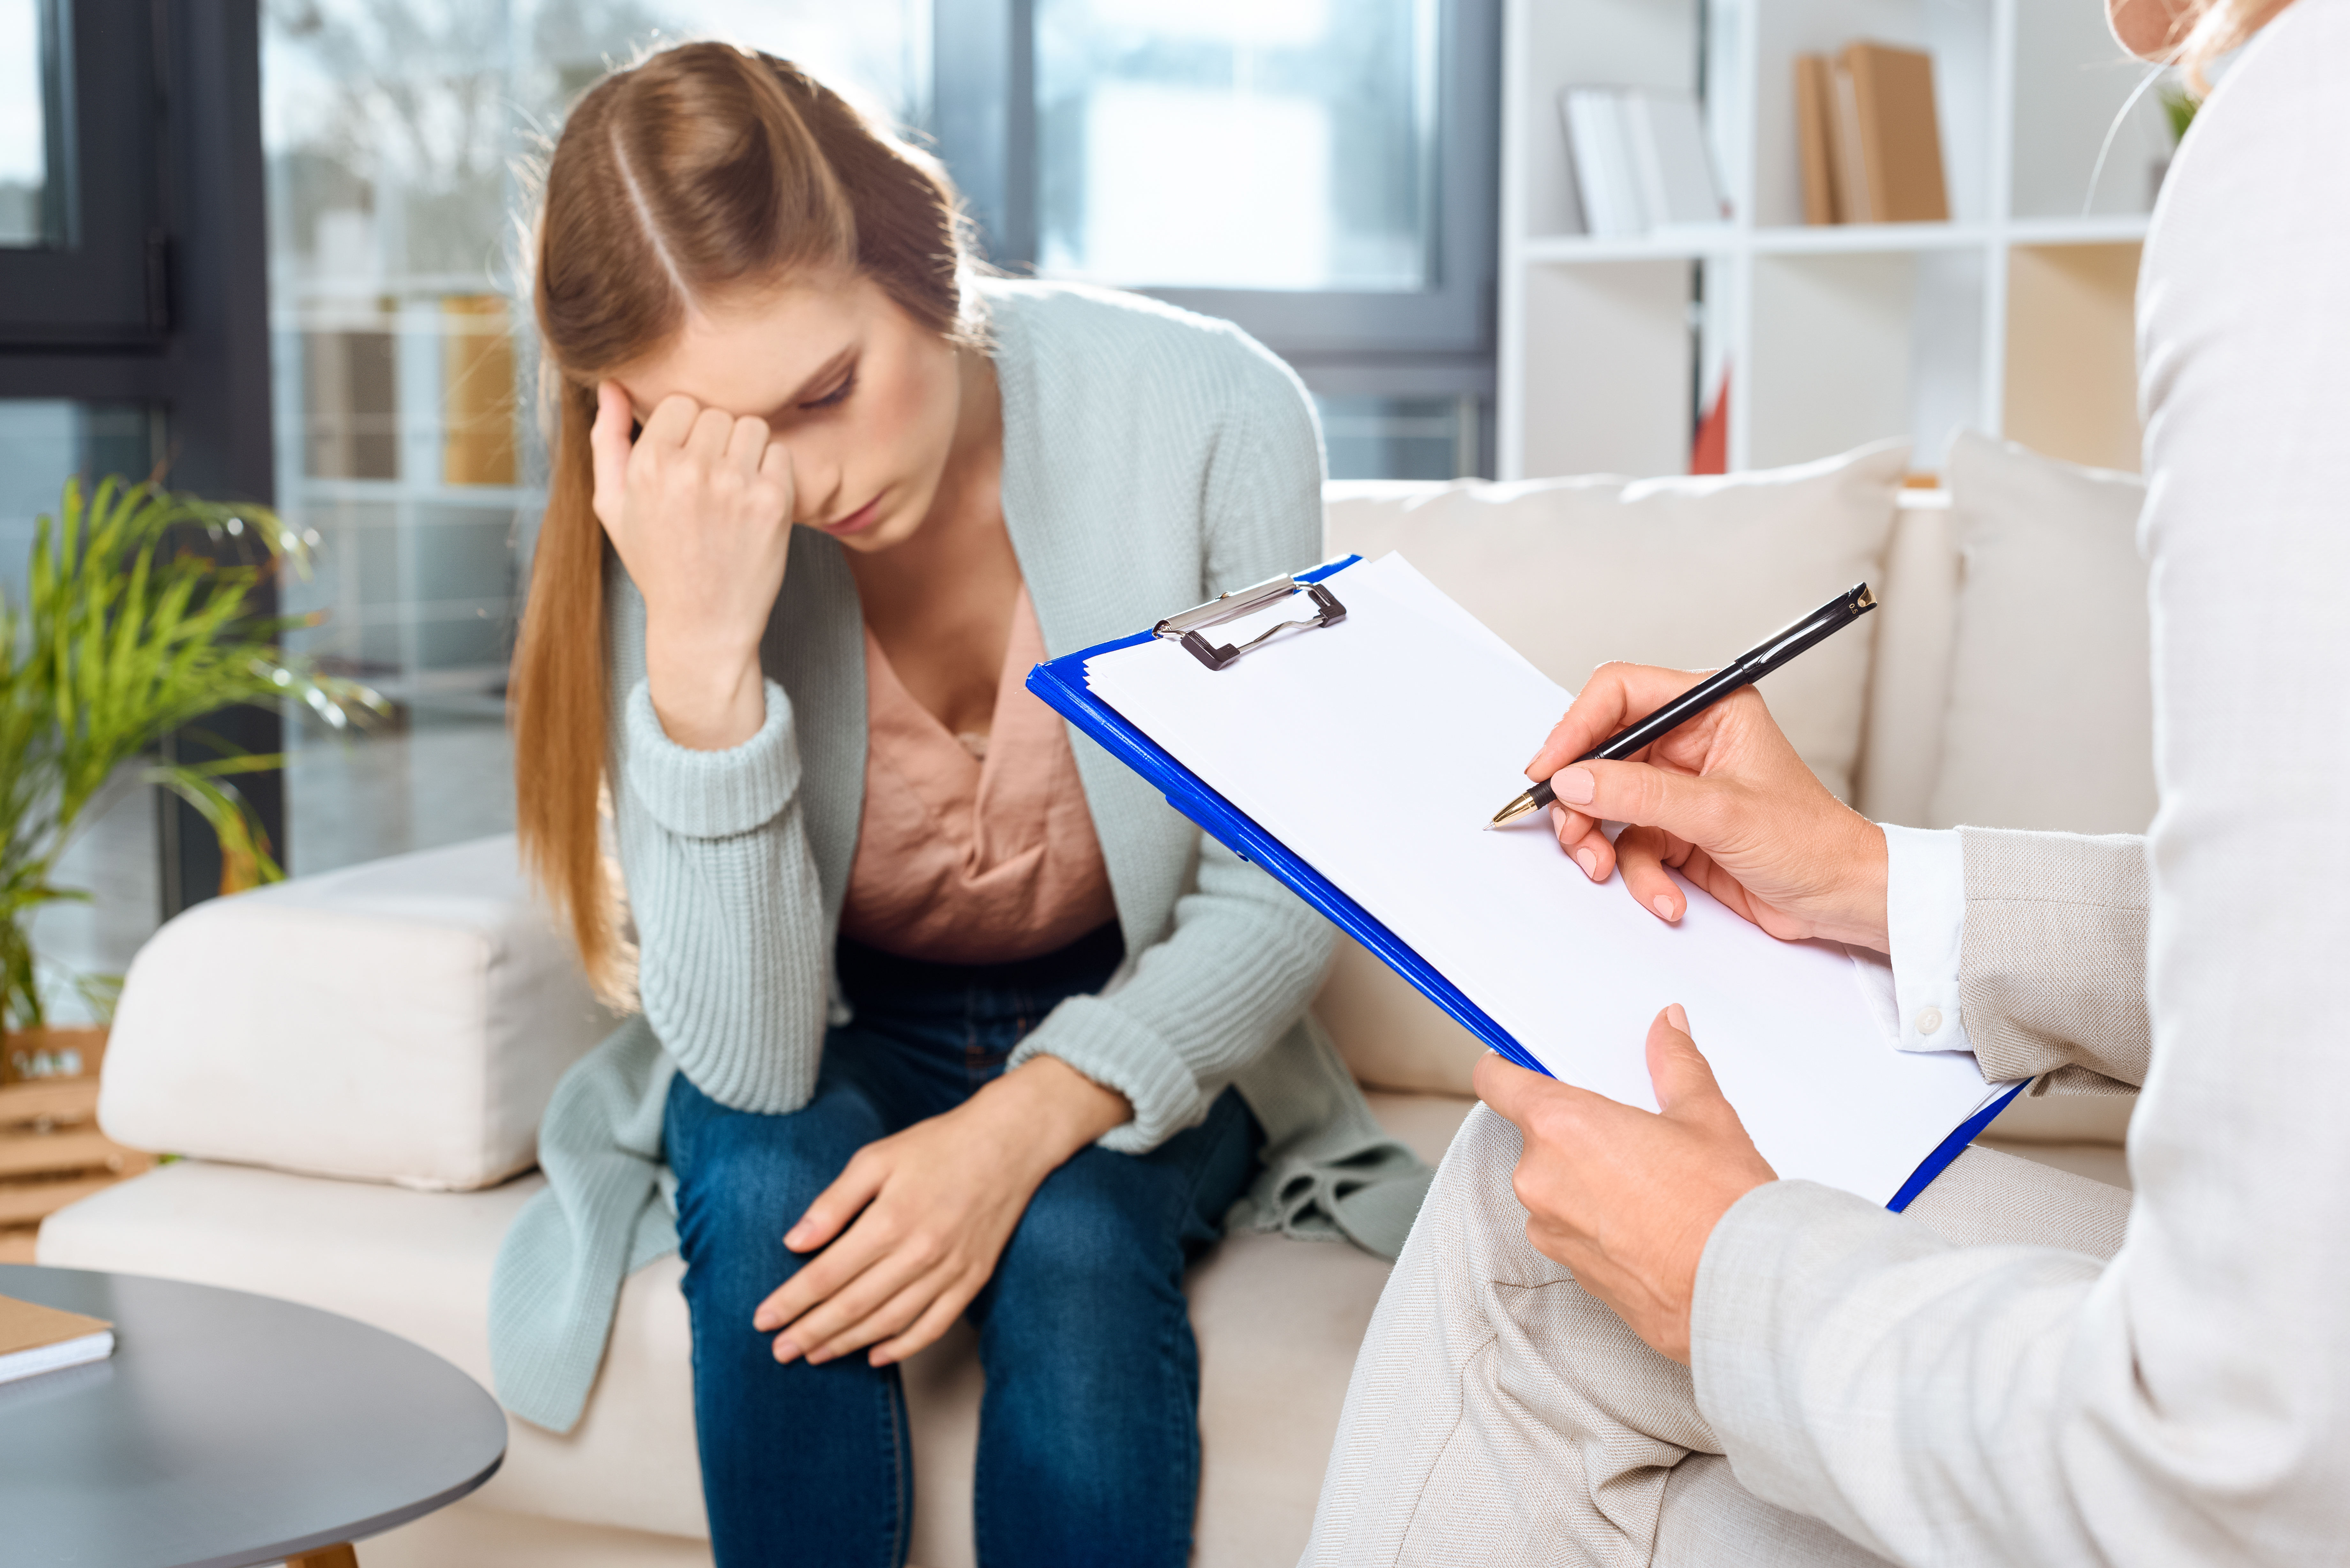 Receiving mental health counseling in rehab